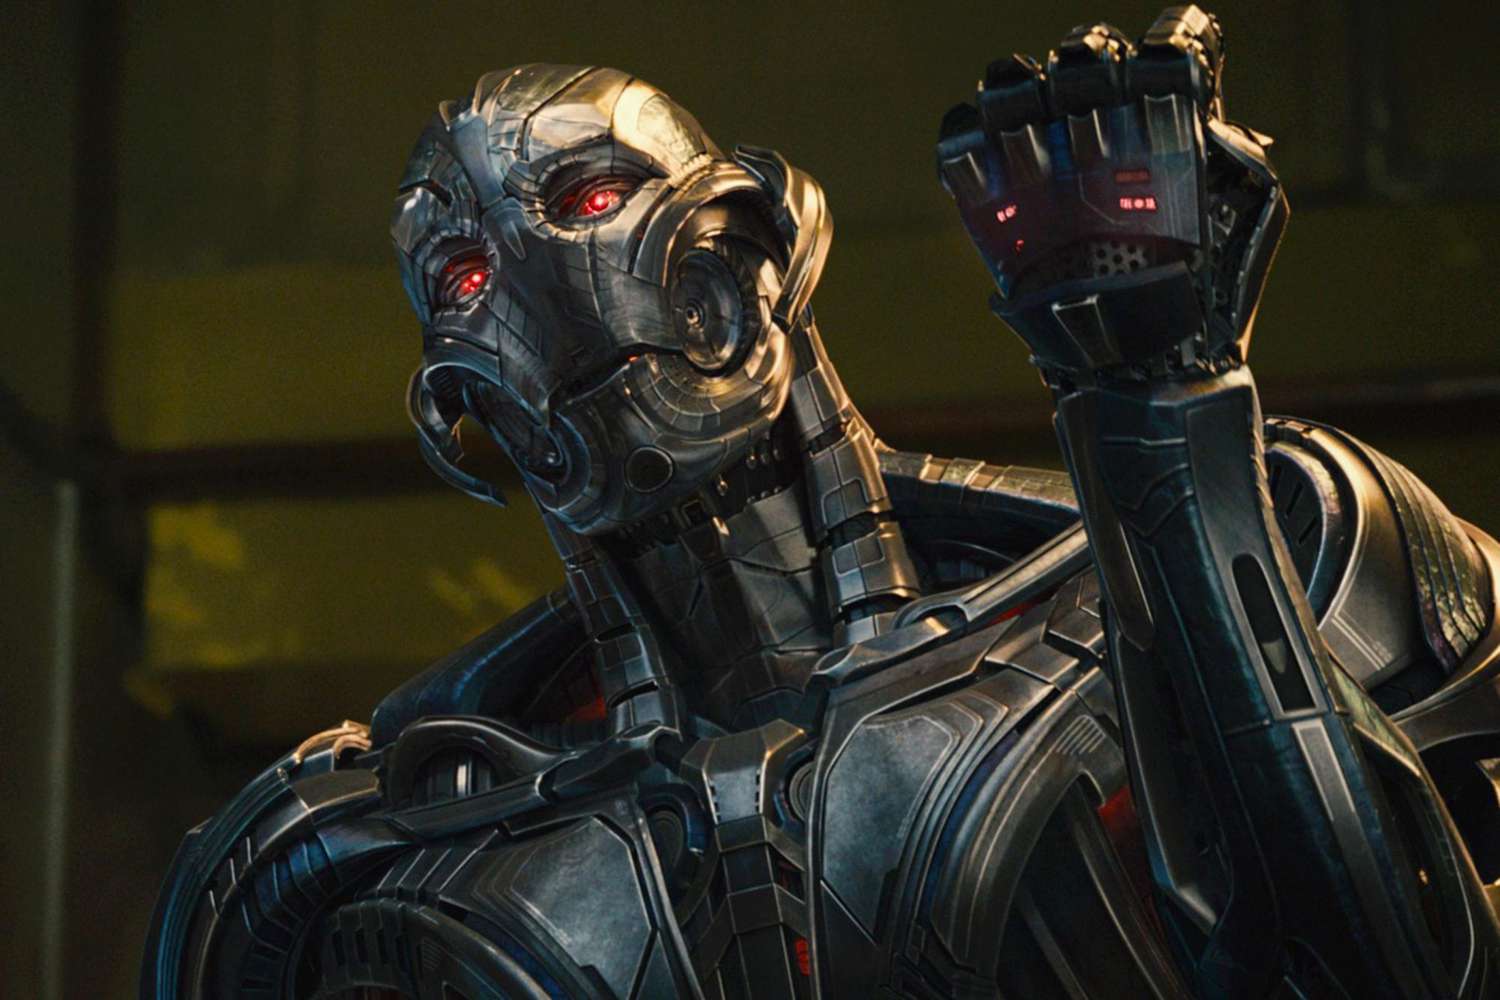 Avengers: Age Of Ultron (2015)Ultron Prime (voiced by James Spader)